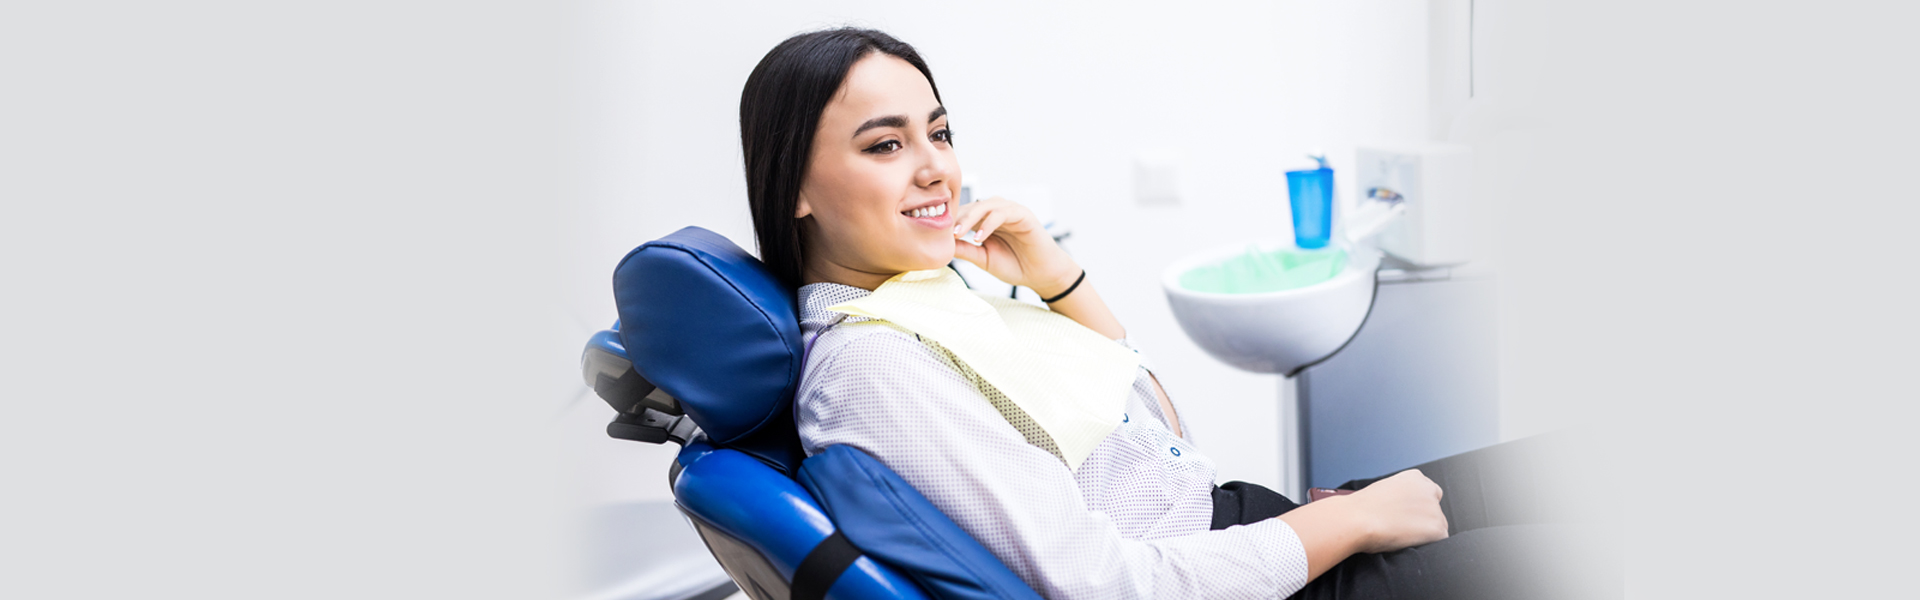 6 Non-Invasive Cosmetic Treatments for Your Smile Makeover